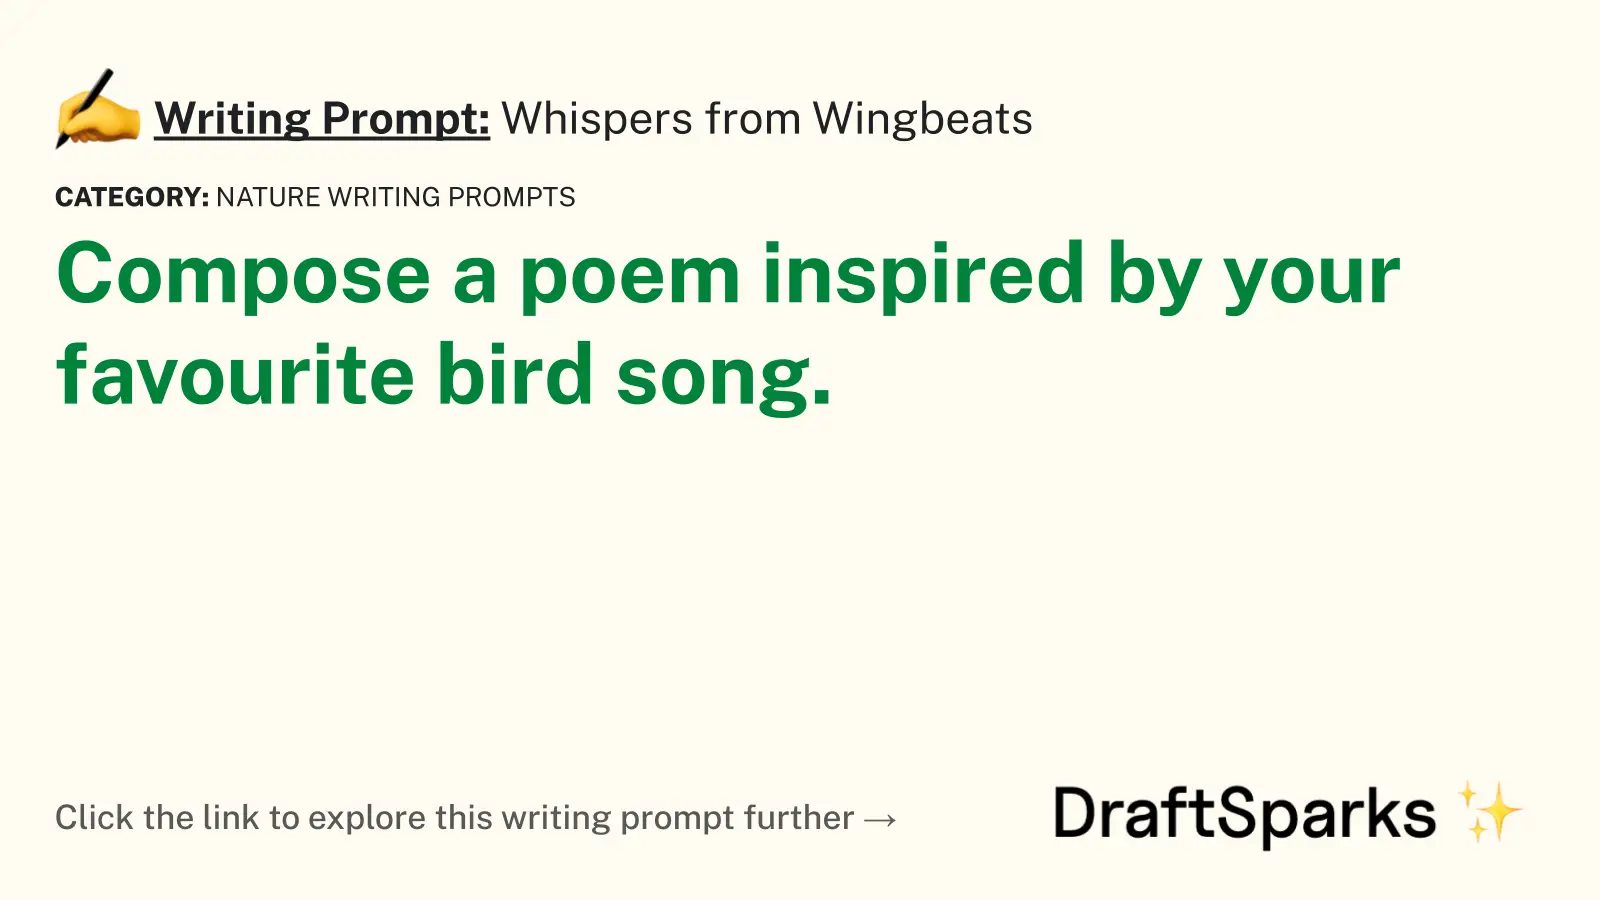 Whispers from Wingbeats